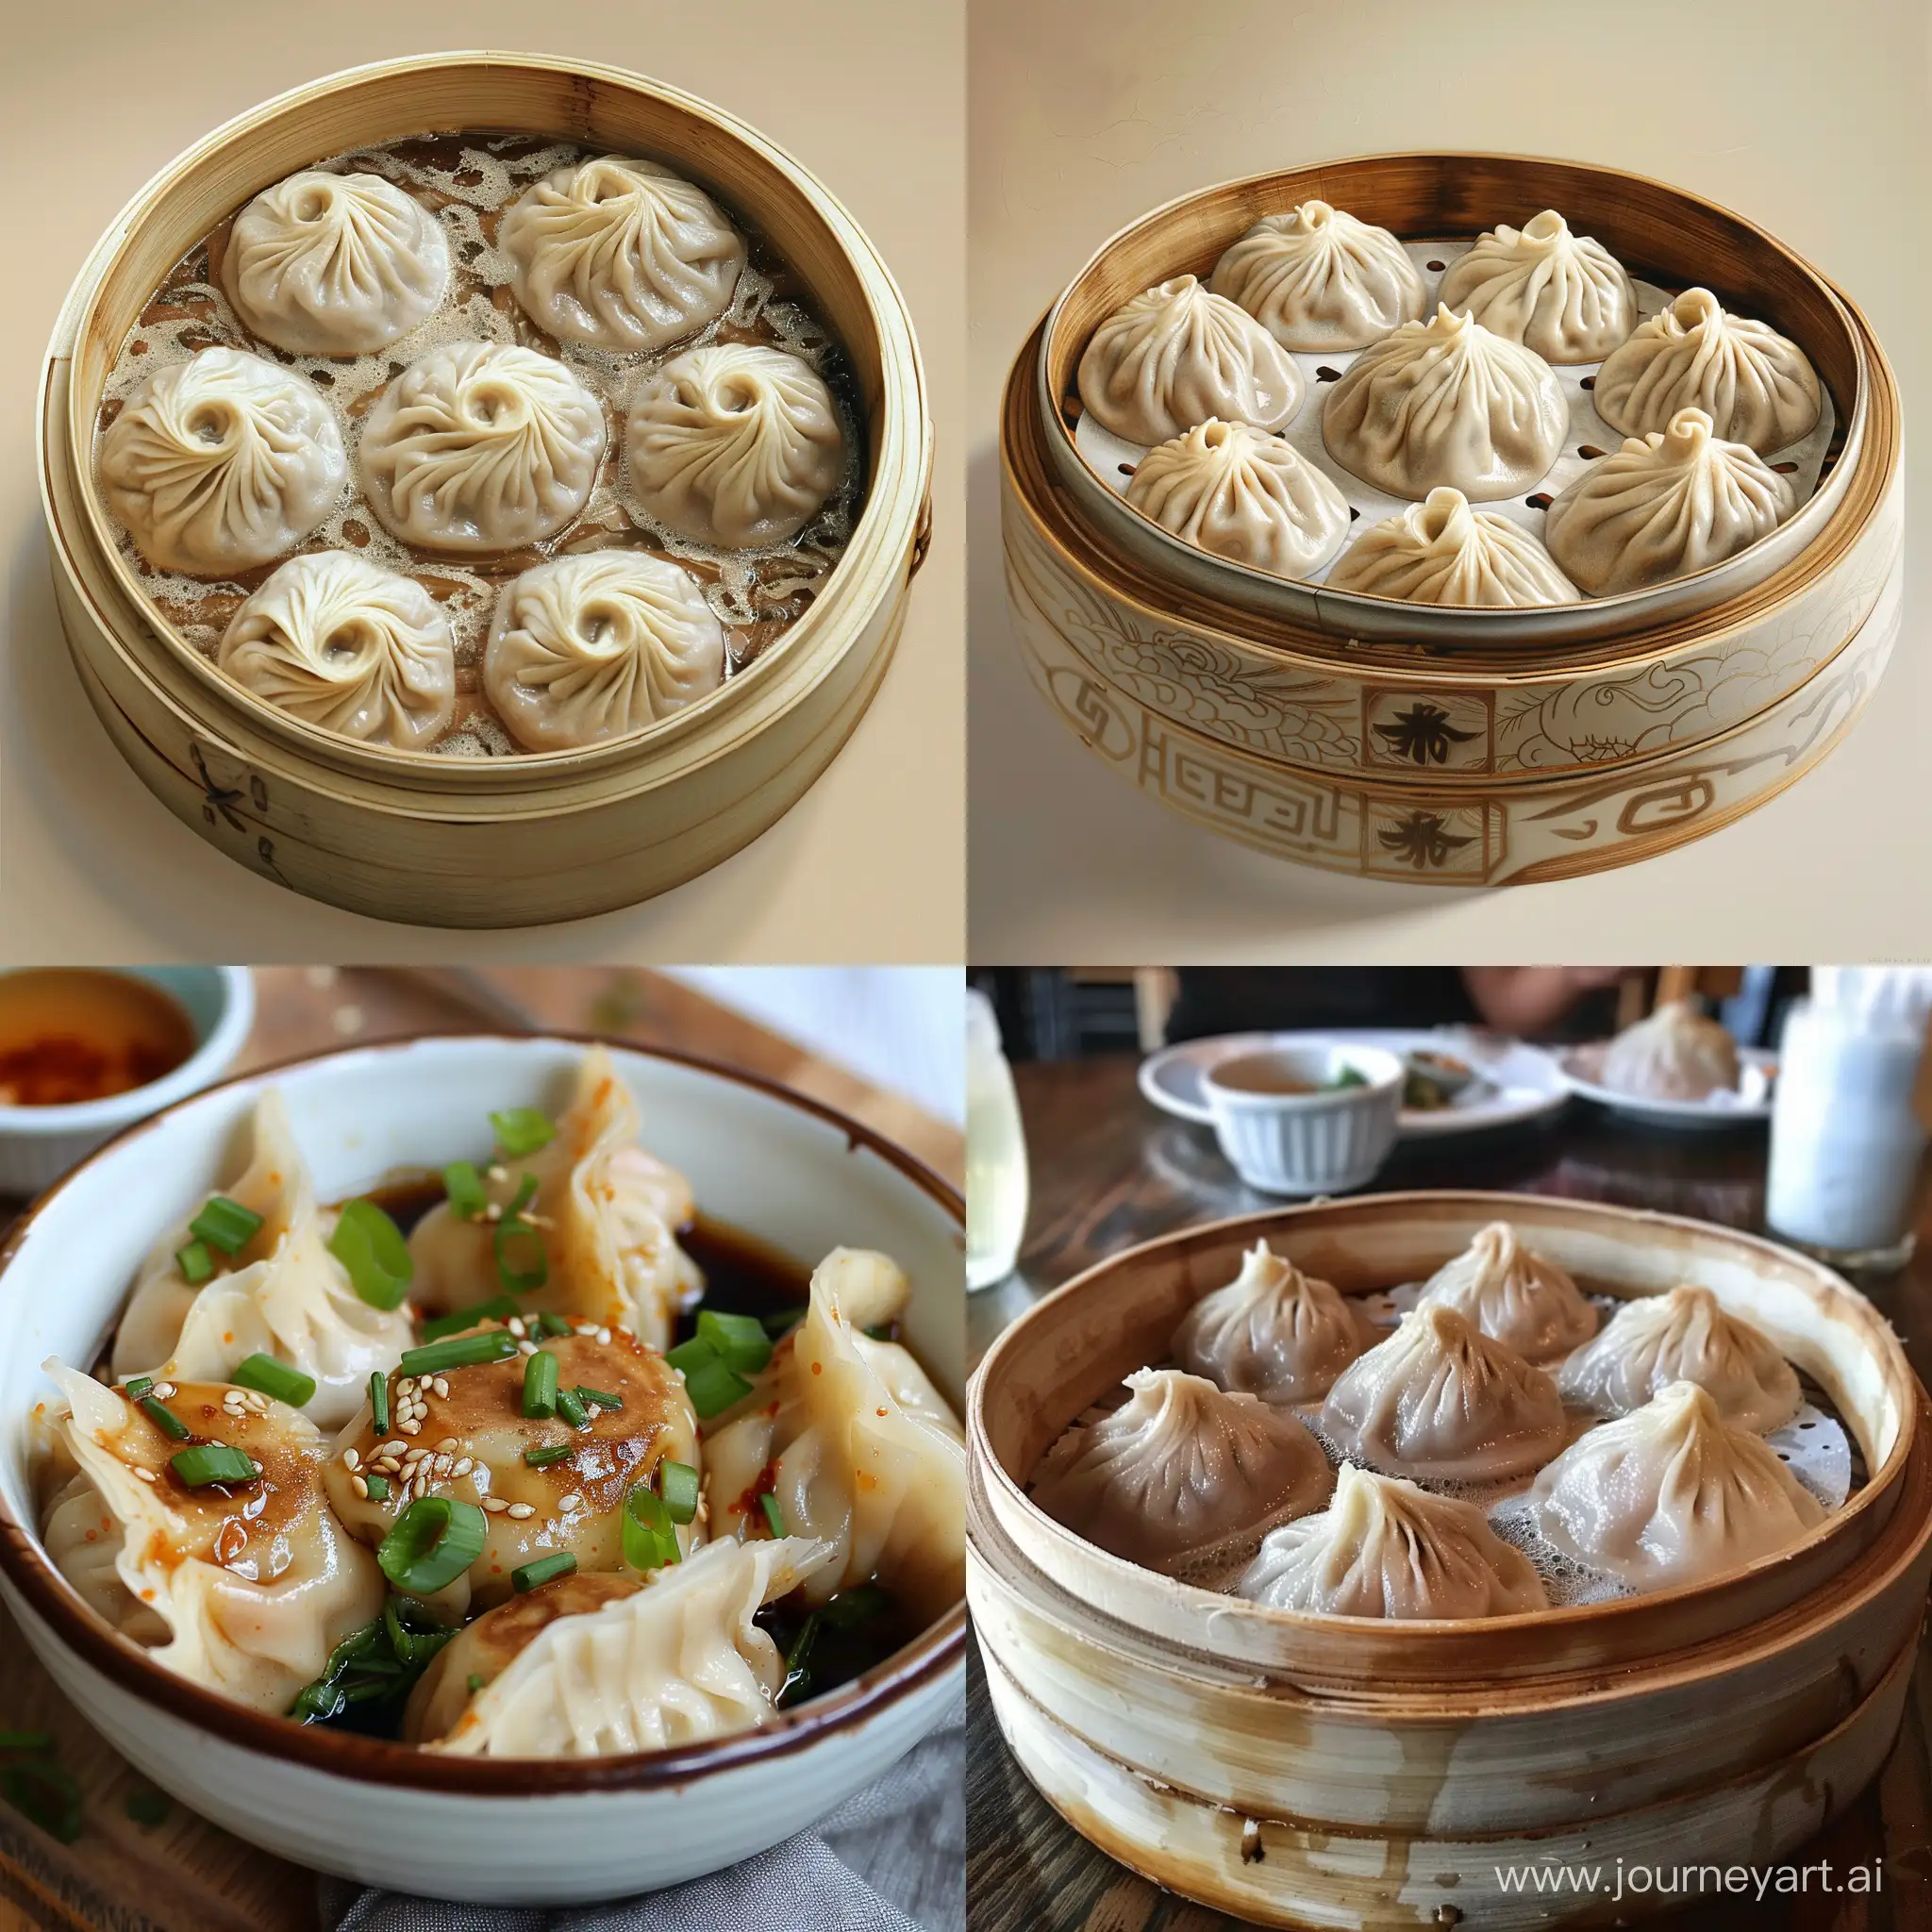 Delicious-Miracle-Dumplings-in-Photorealistic-Style